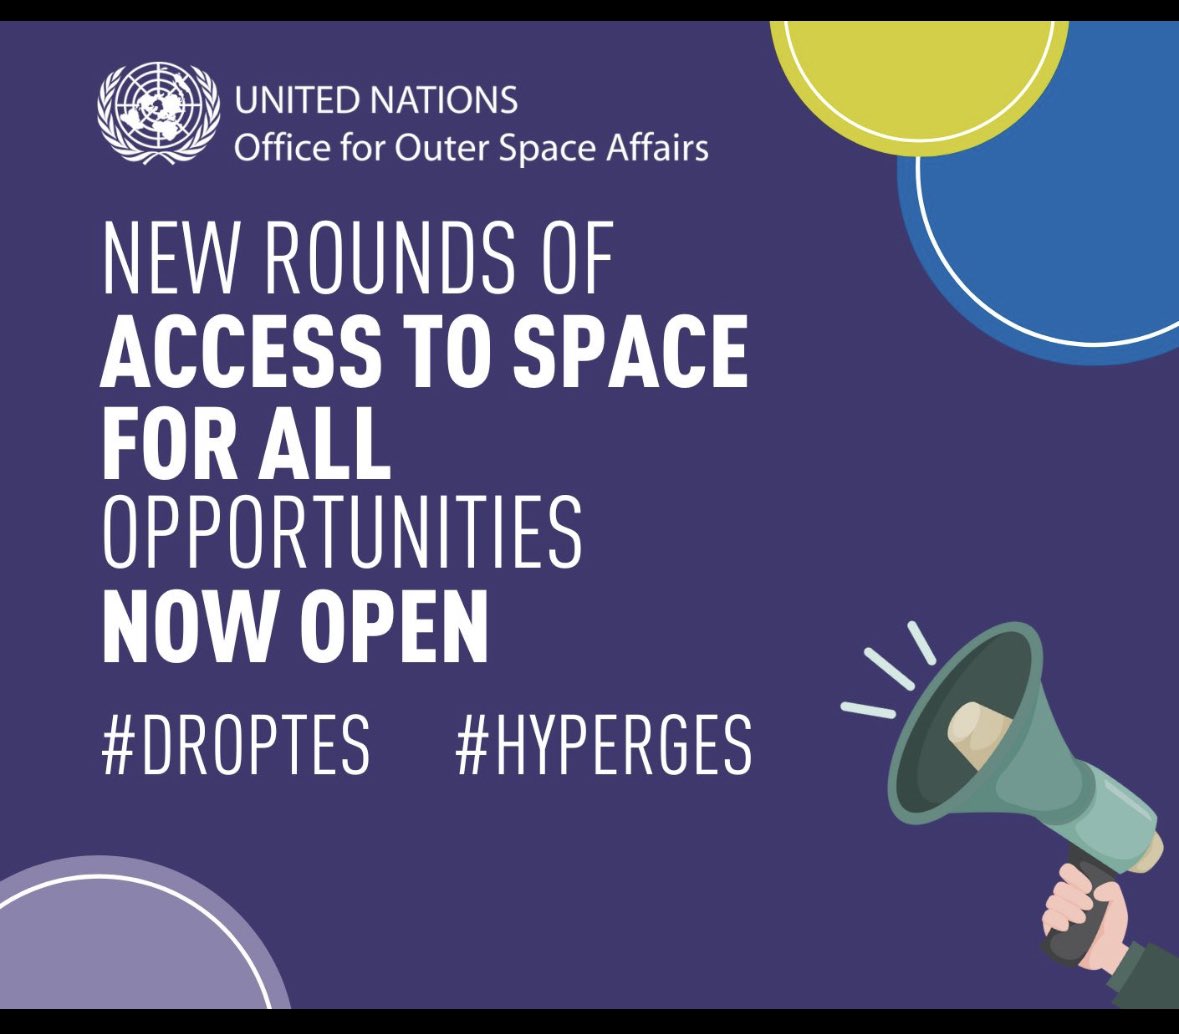 New rounds have just been announced for 
➡️#DropTES microgravity experiments at ZARM supported by German Aerospace Center (DLR) 

➡️#HyperGES hypergravity experiments at ESA Technology
@UNOOSA @UN